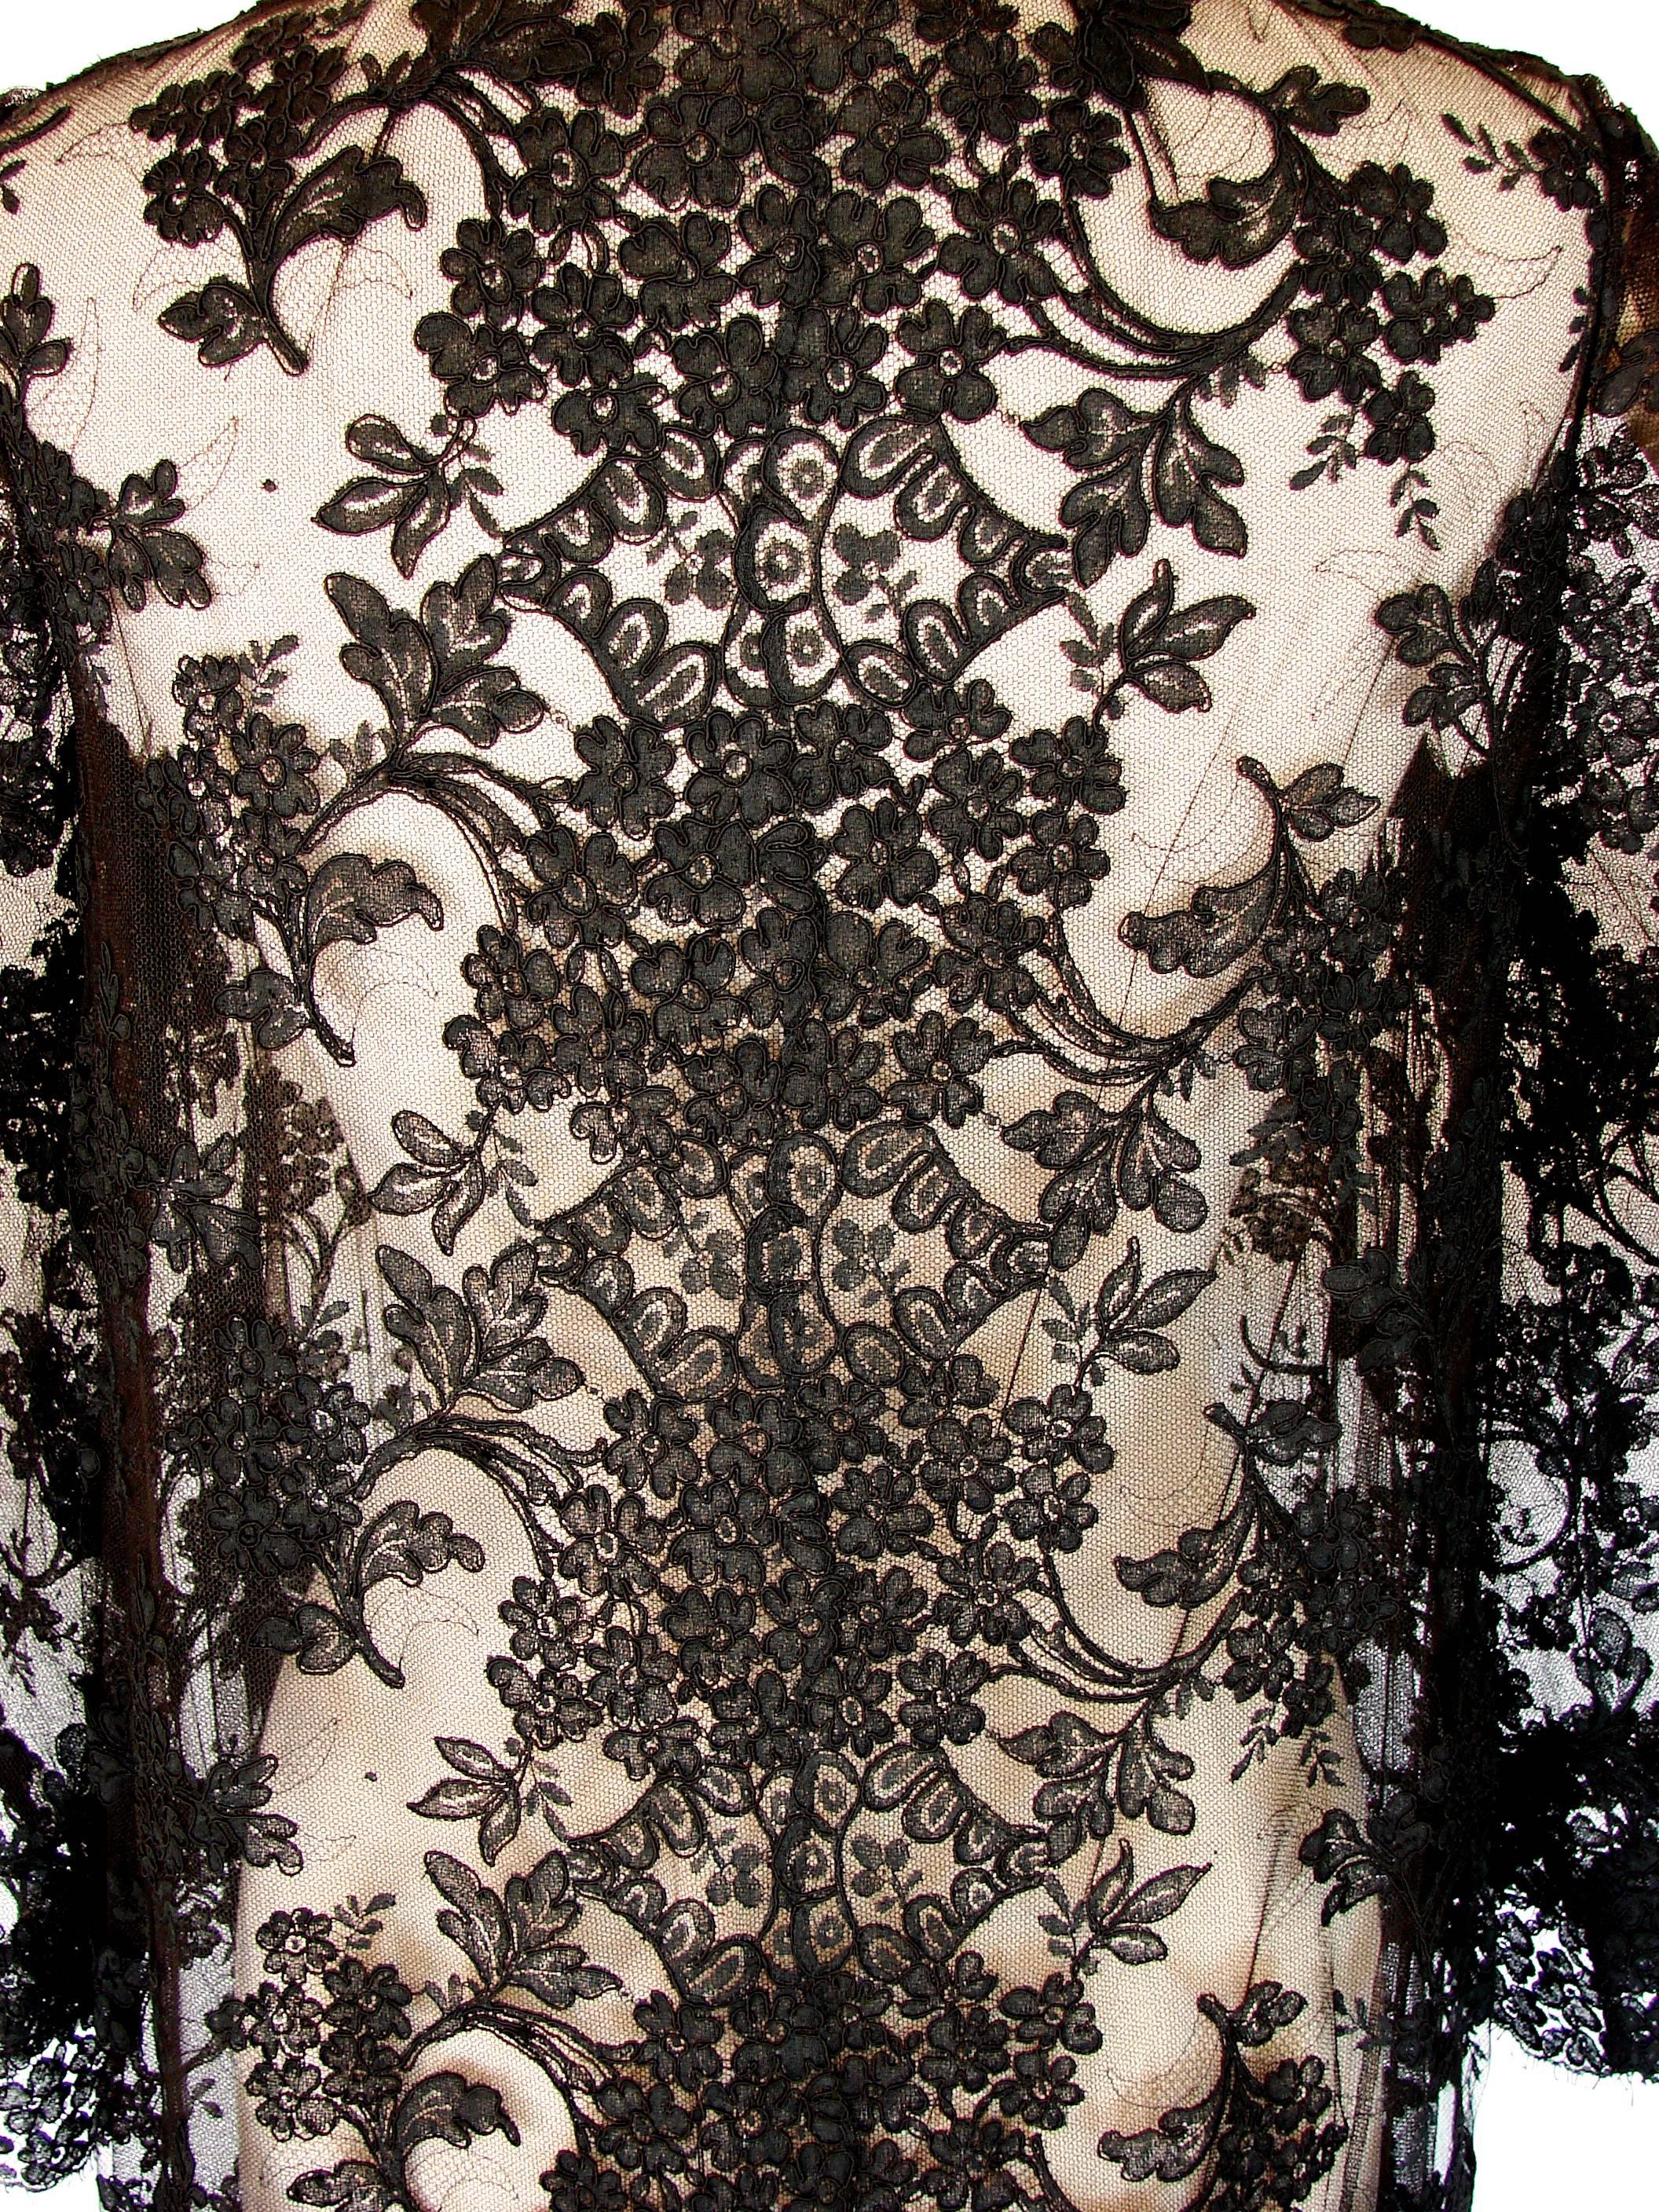 Ron Amey Attr. Fabulous Black Lace Opera Coat with Angel Sleeves Size M 1970s 4